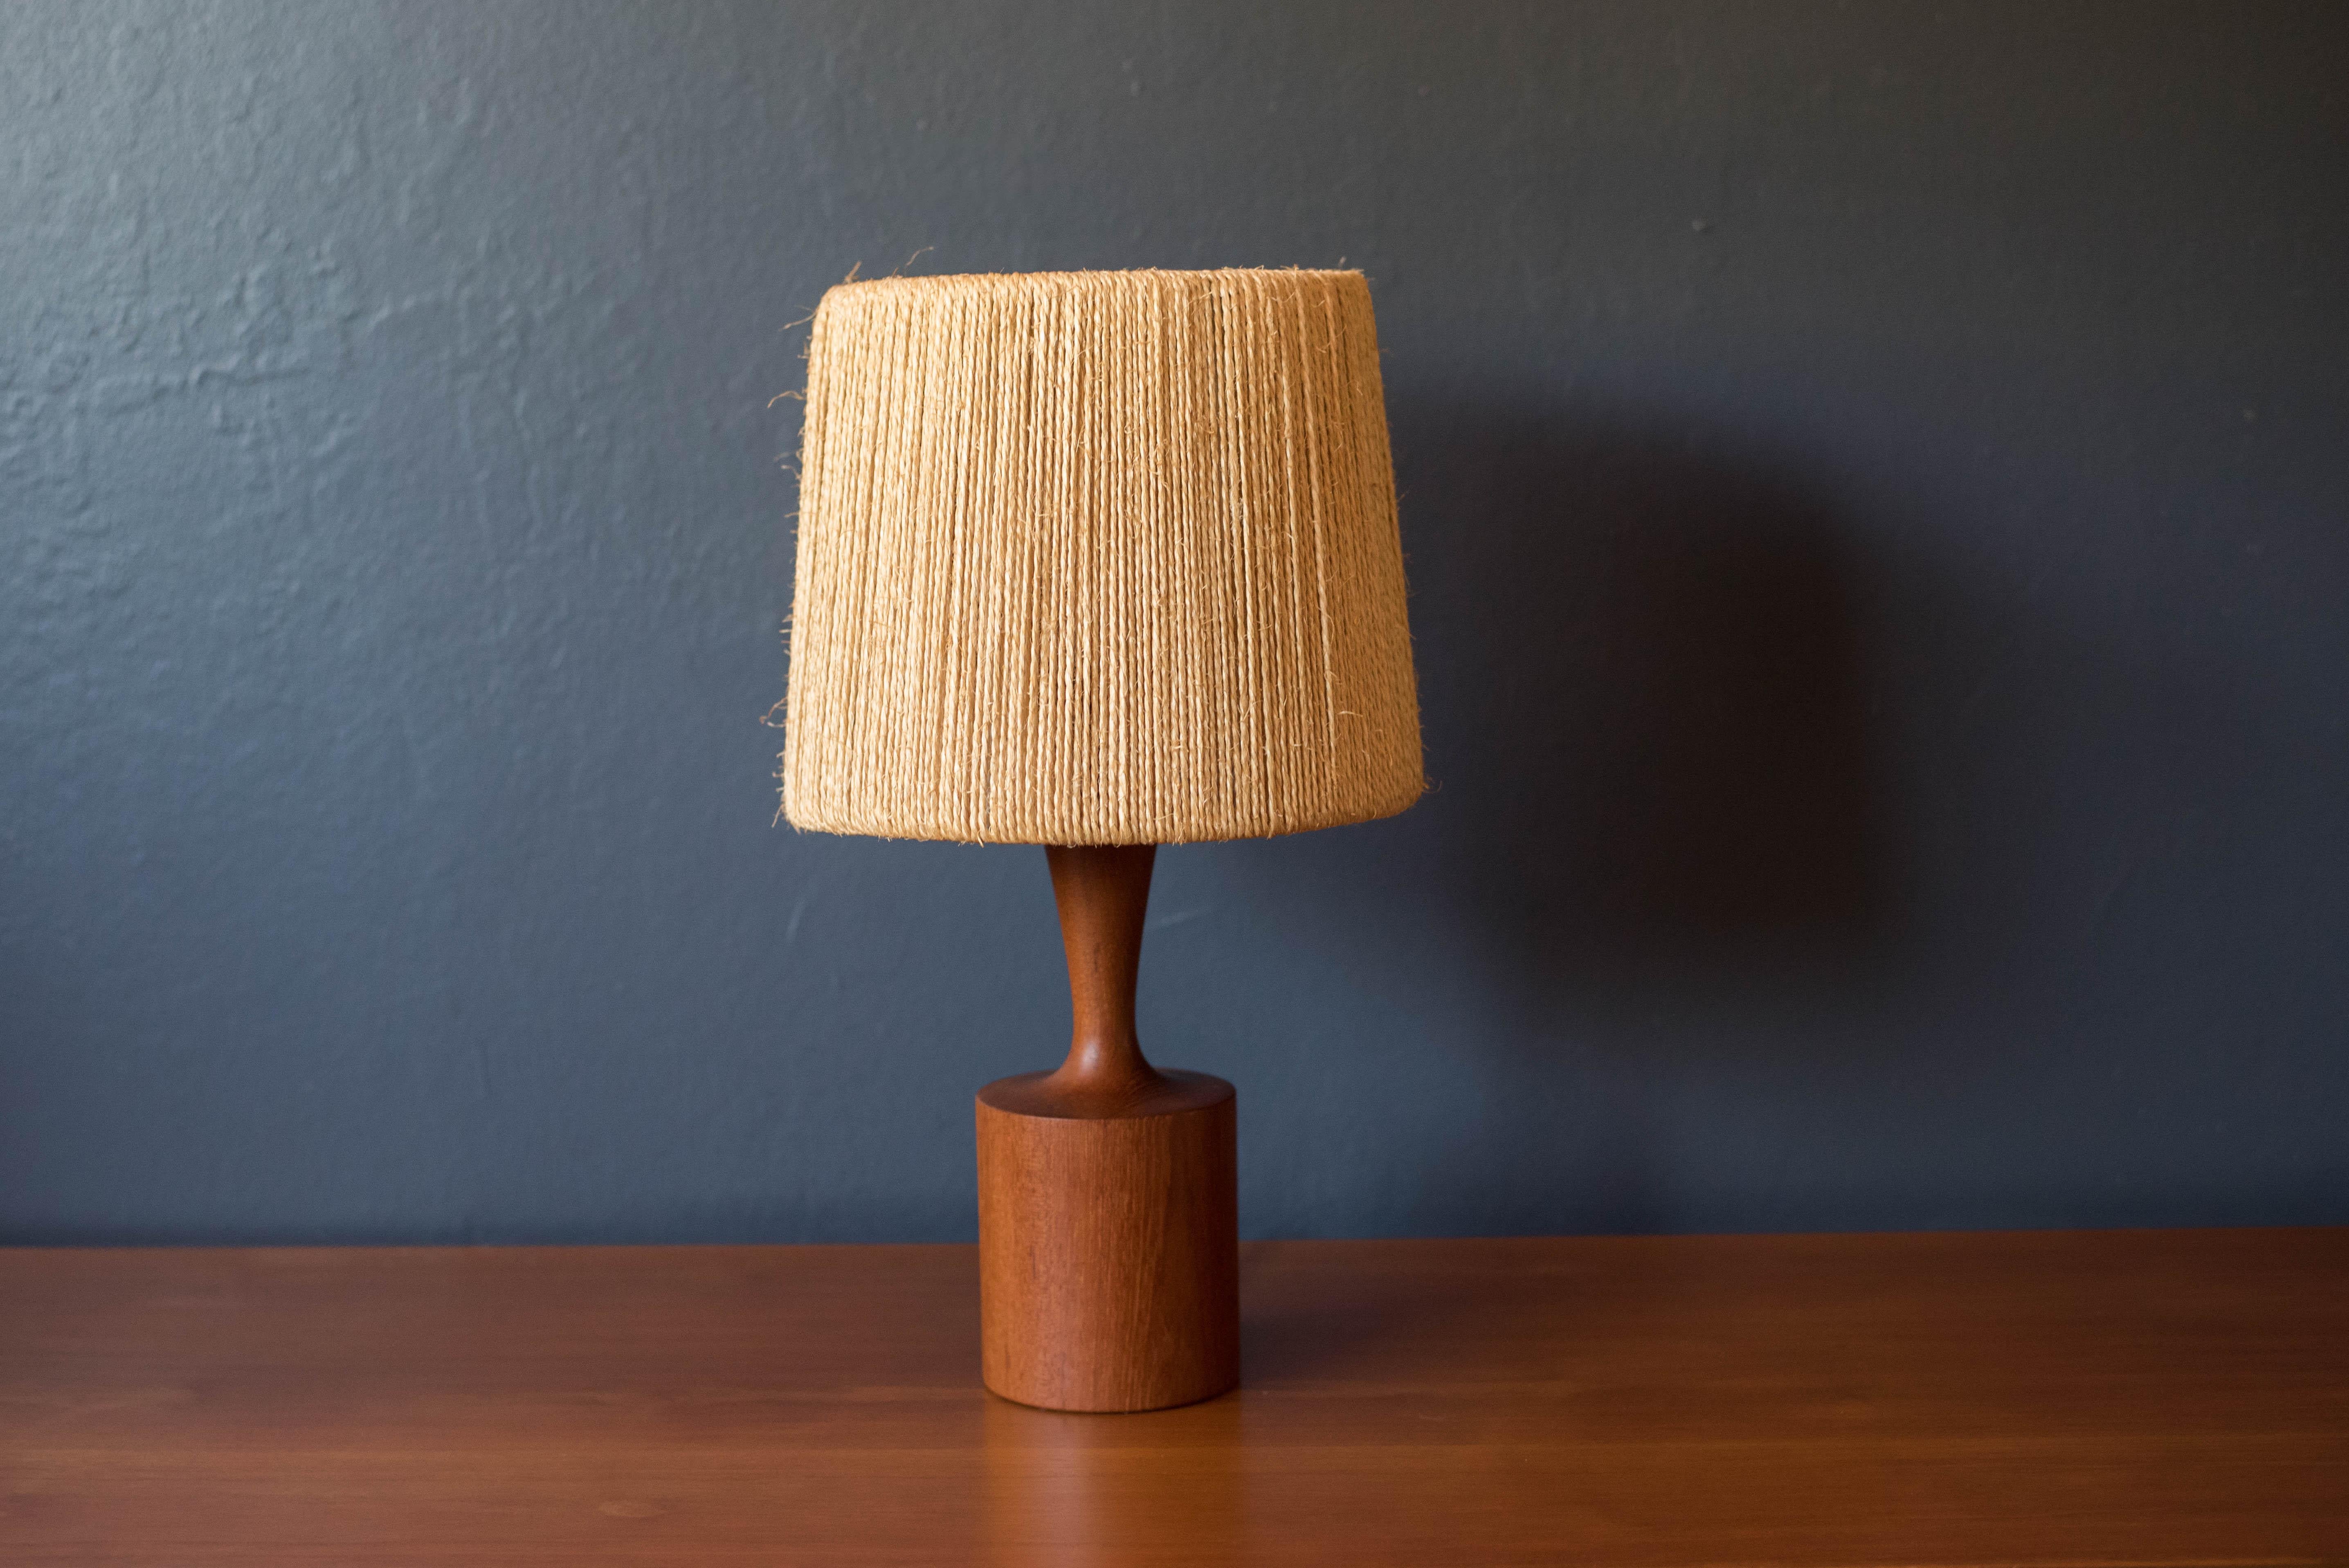 Mid-Century Modern accent table lamp by Fog and Morup, Denmark circa 1960s. This piece features a unique sculpted teak stem and base including the original natural jute drum shade. 


Base 4